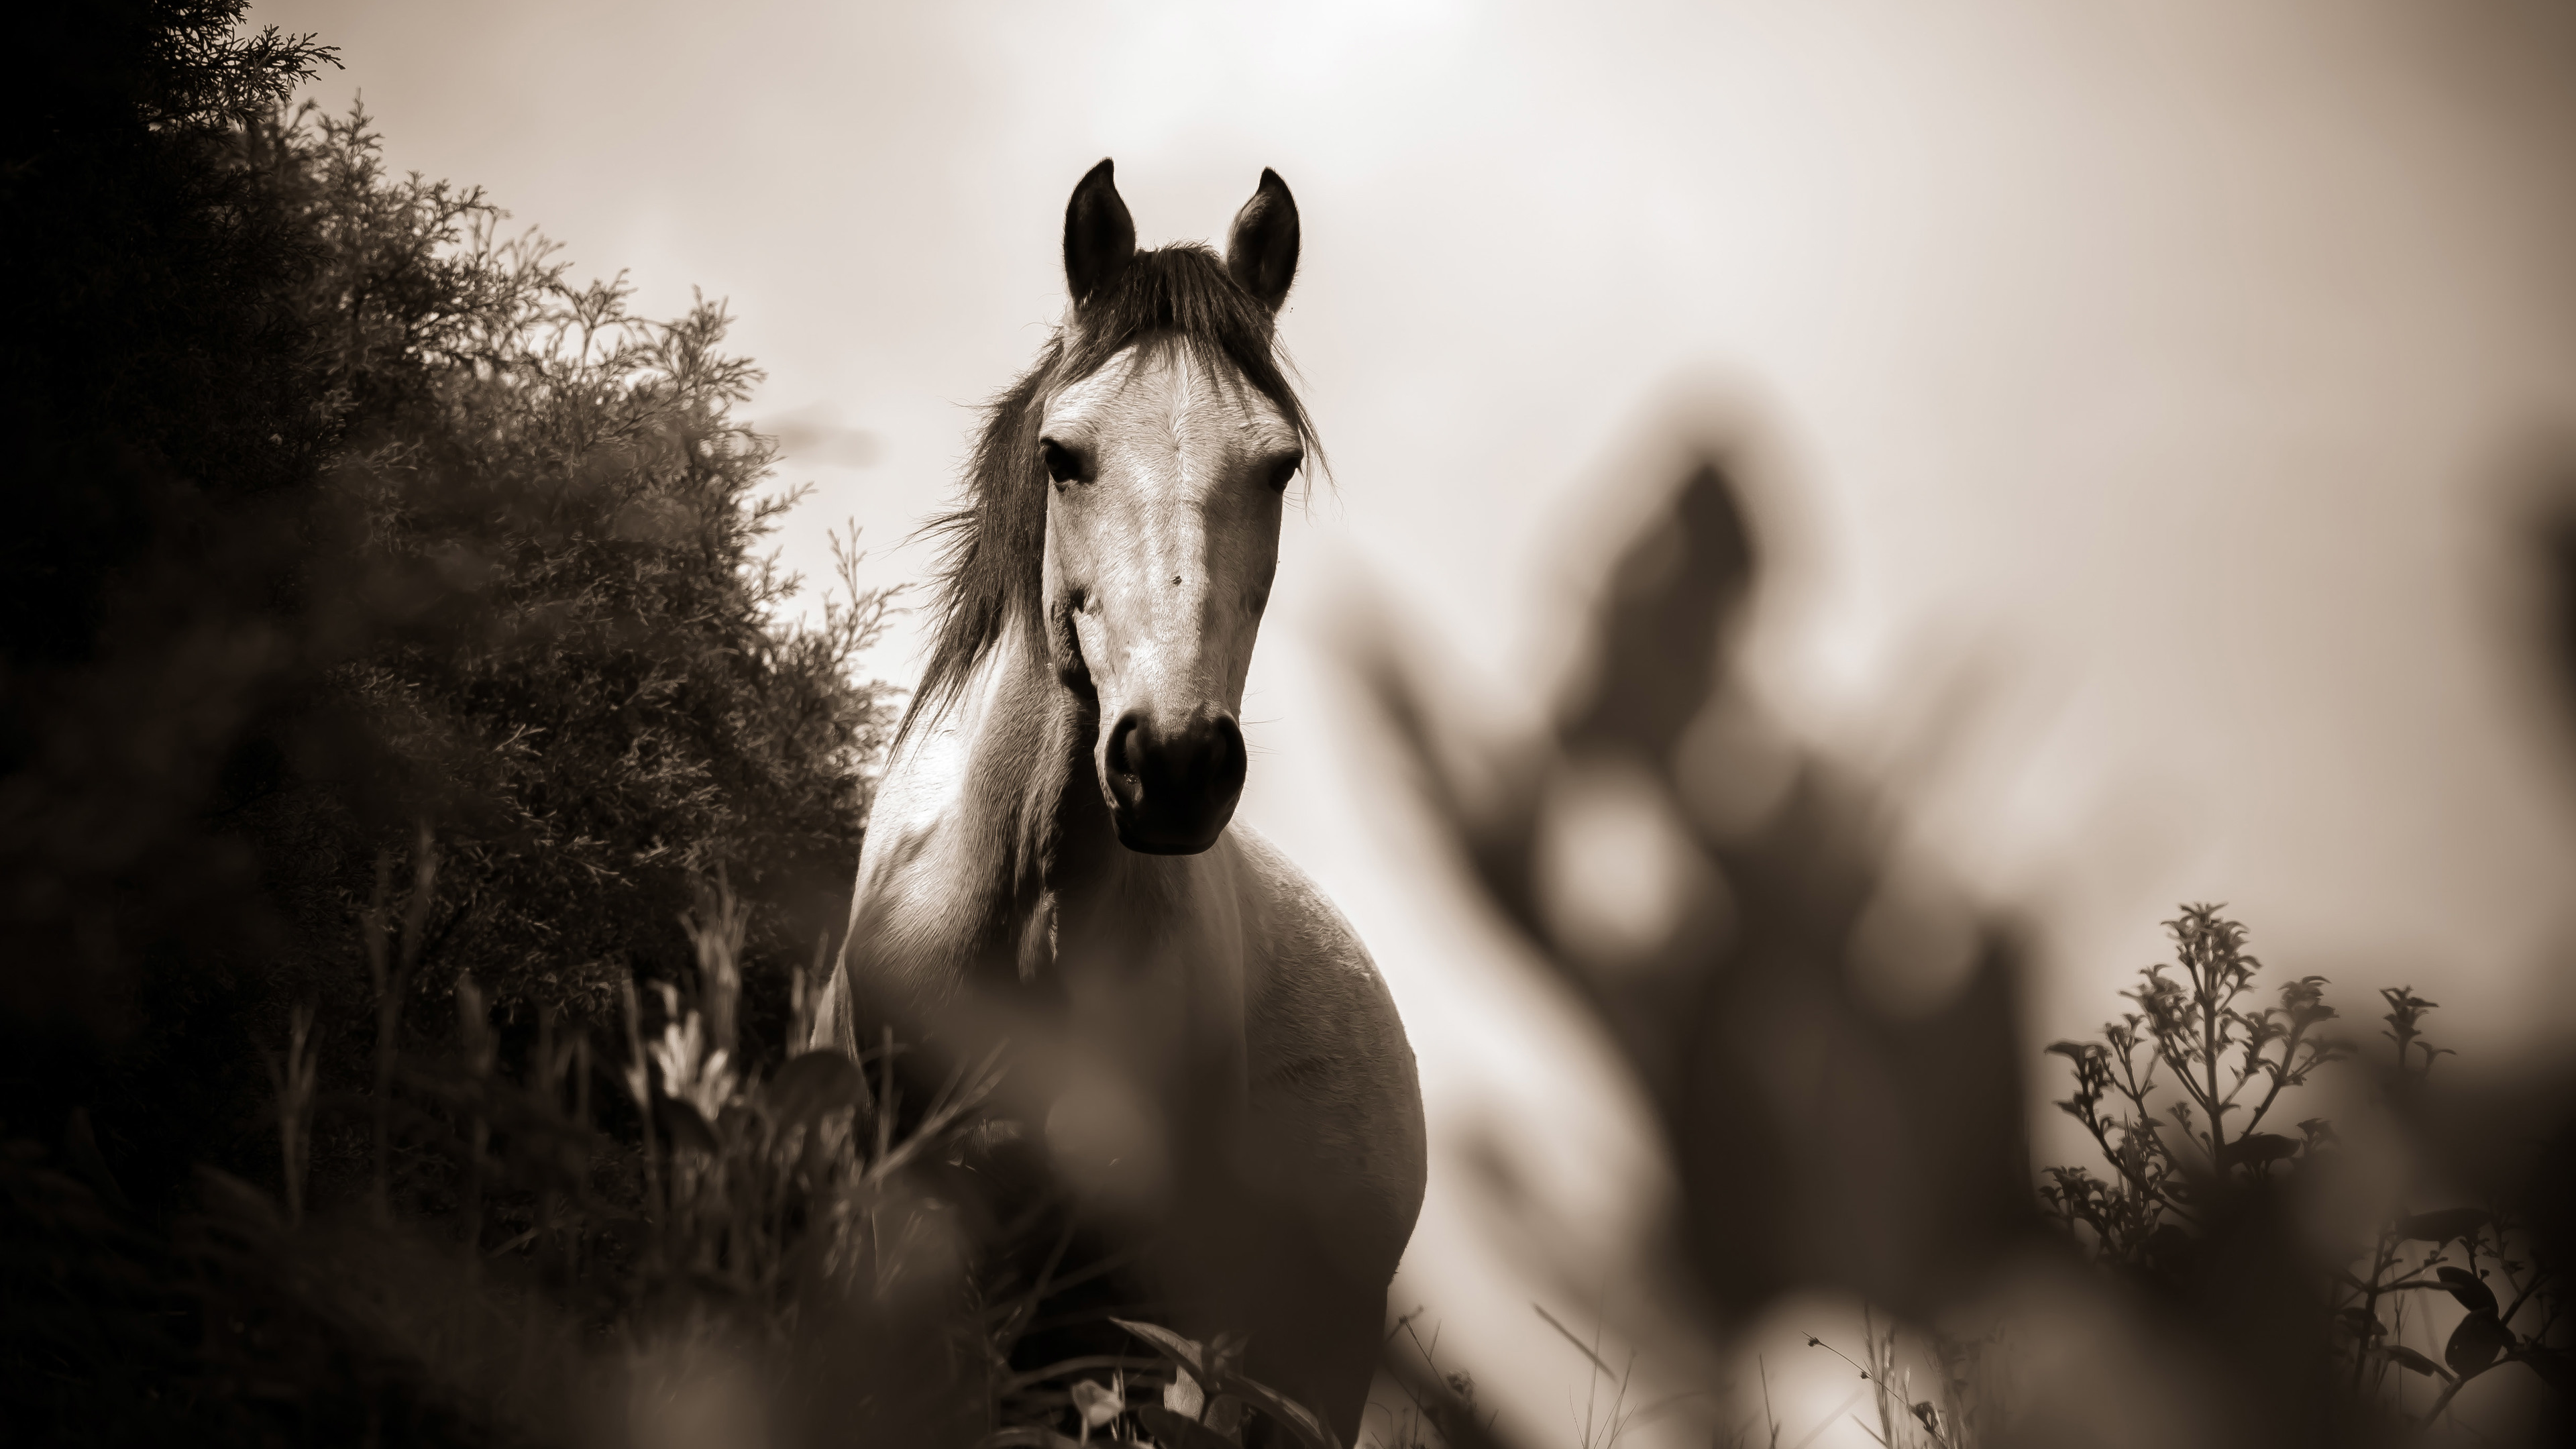 Horse Grayscale Wallpaper For Laptop